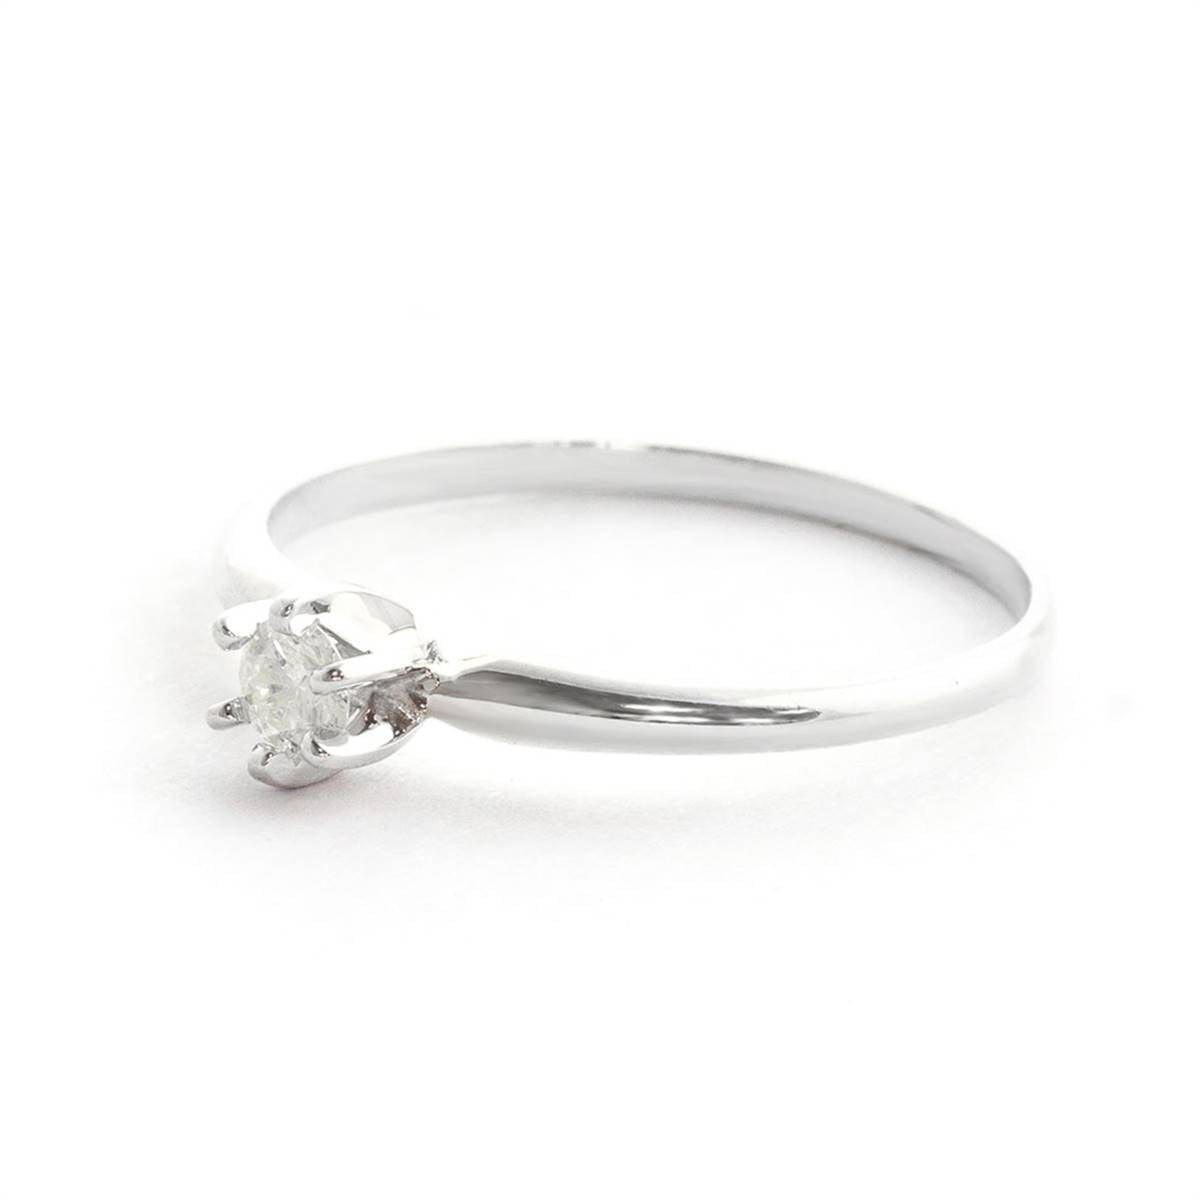 0.15 Carat 14K Solid White Gold Solitaire Ring 0.15 Carat Natural Diamond